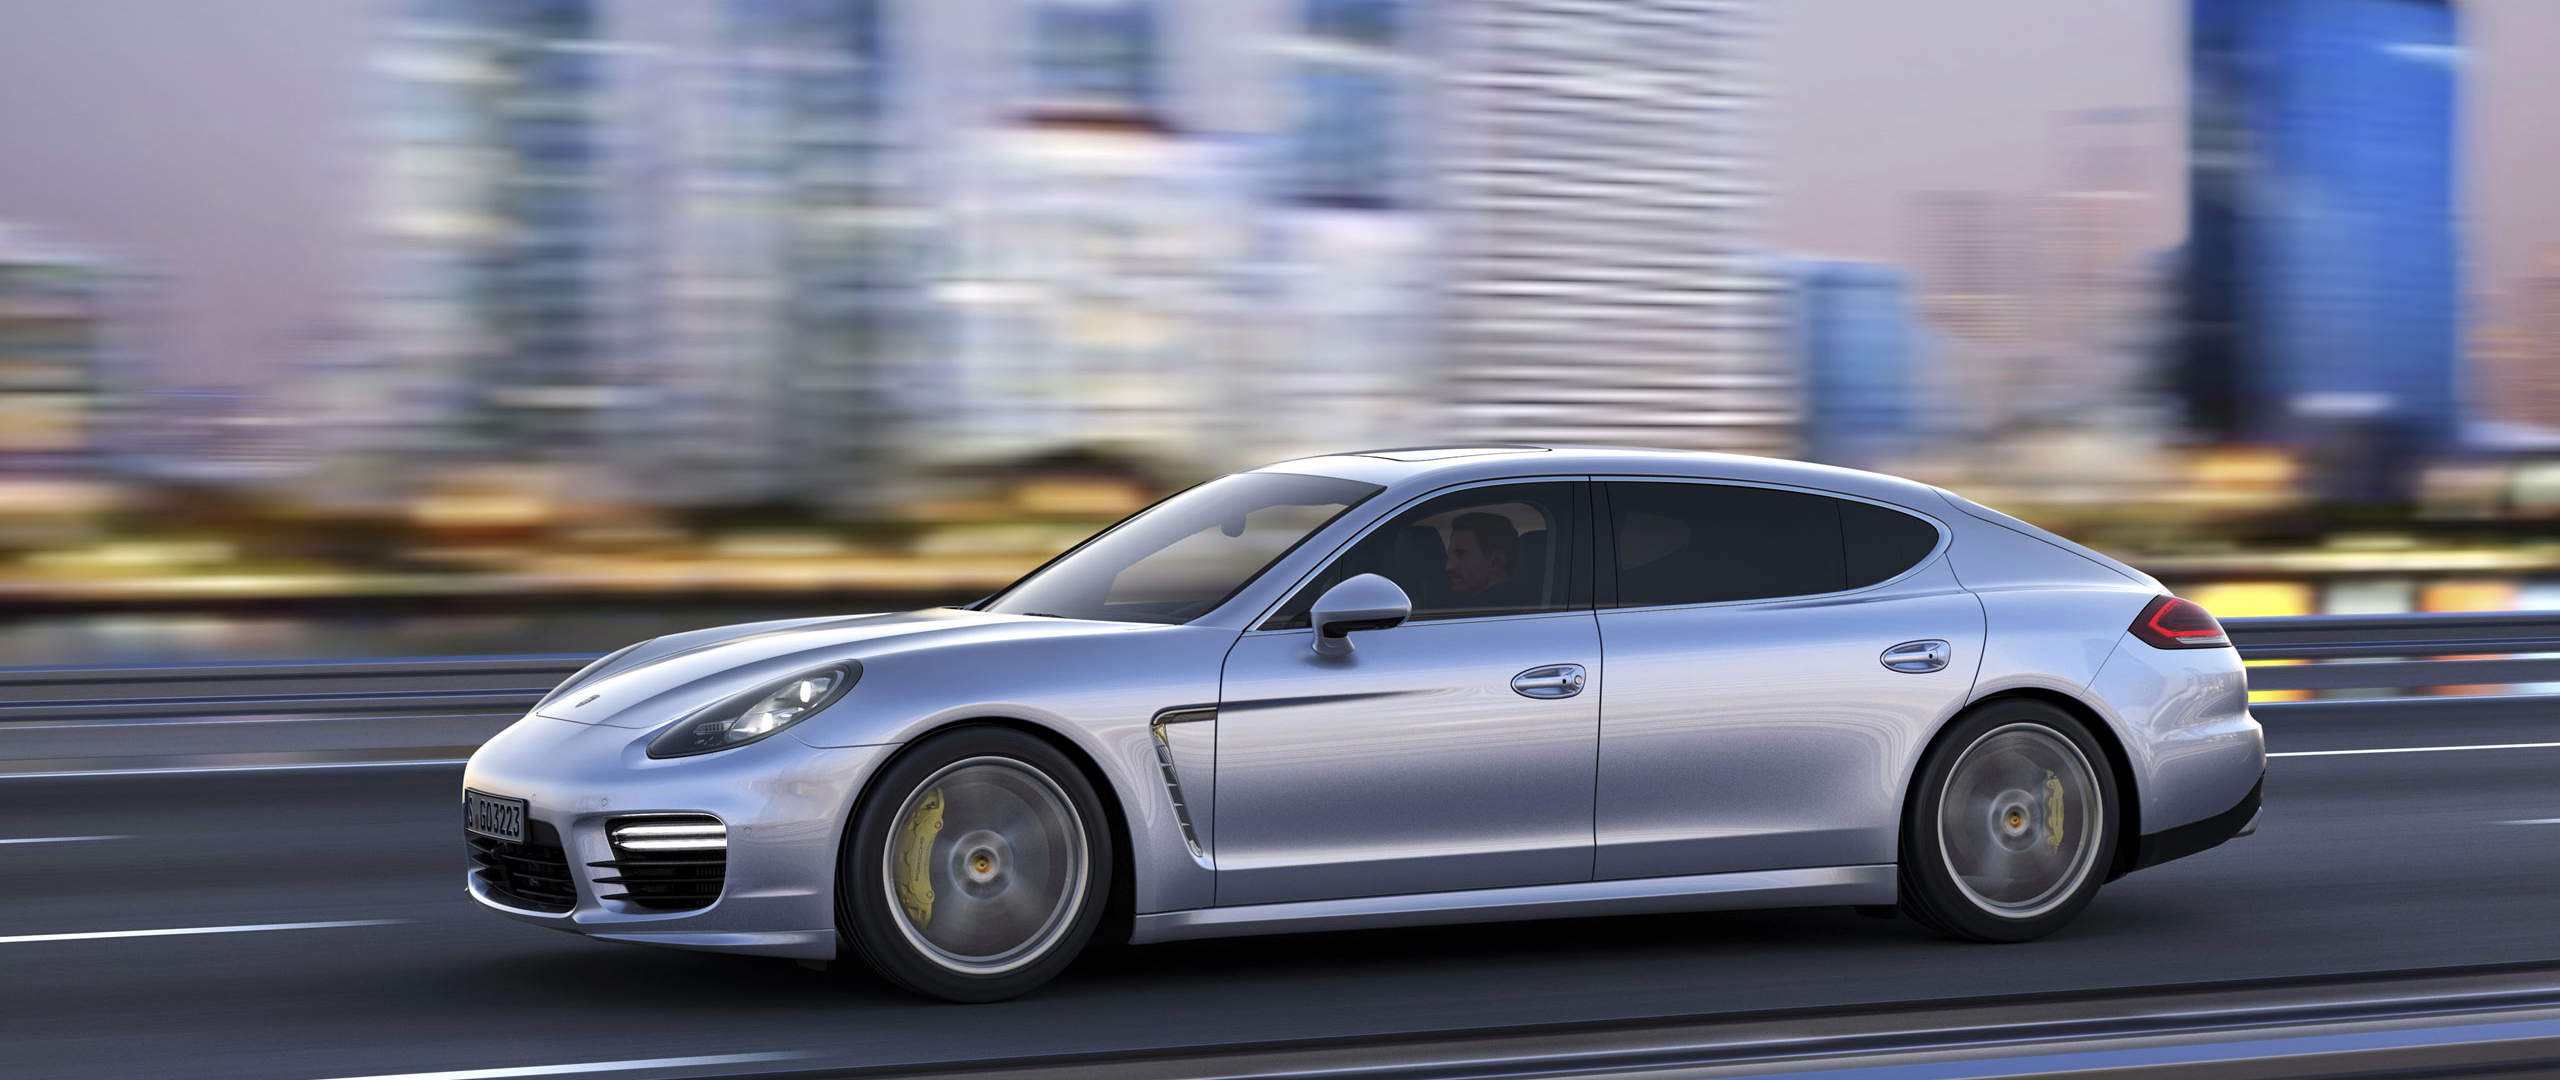 2560x1080 porsche, panamera, side view 2560x1080 Resolution Wallpaper, HD  Cars 4K Wallpapers, Images, Photos and Background - Wallpapers Den